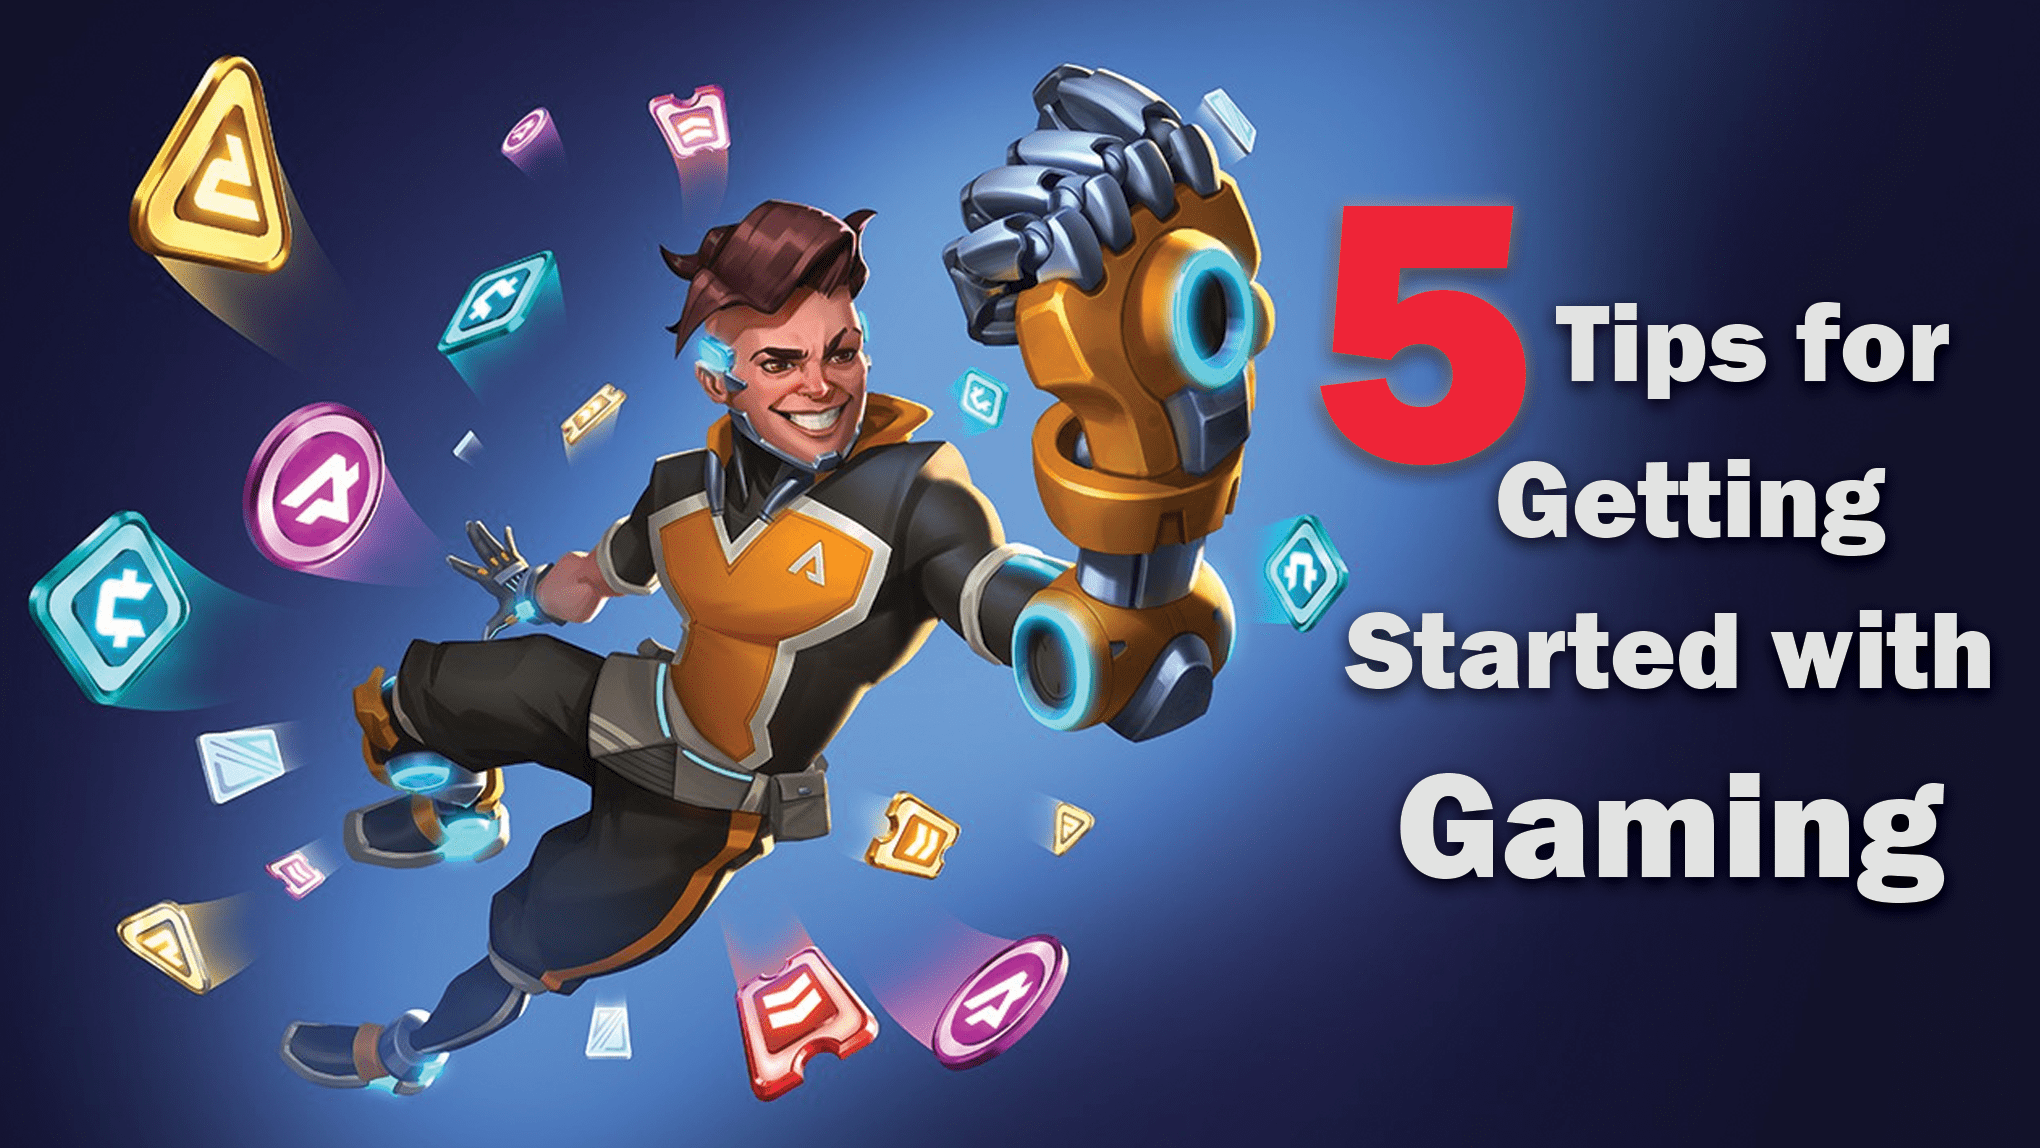 5 Tips for Getting Started with Gaming